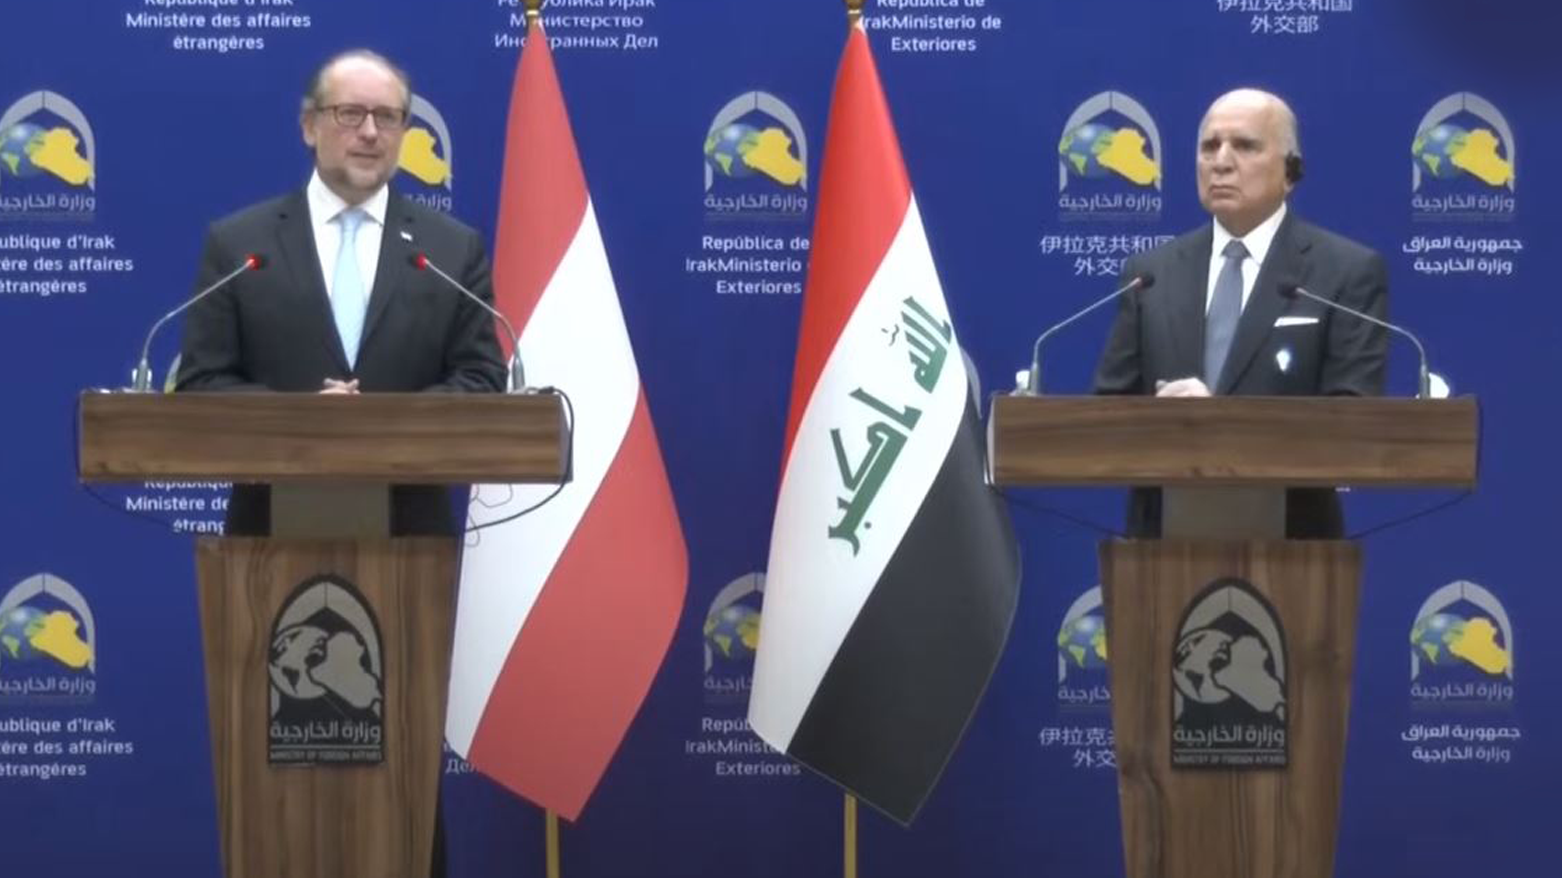 Austria to reopen its embassy in Iraq